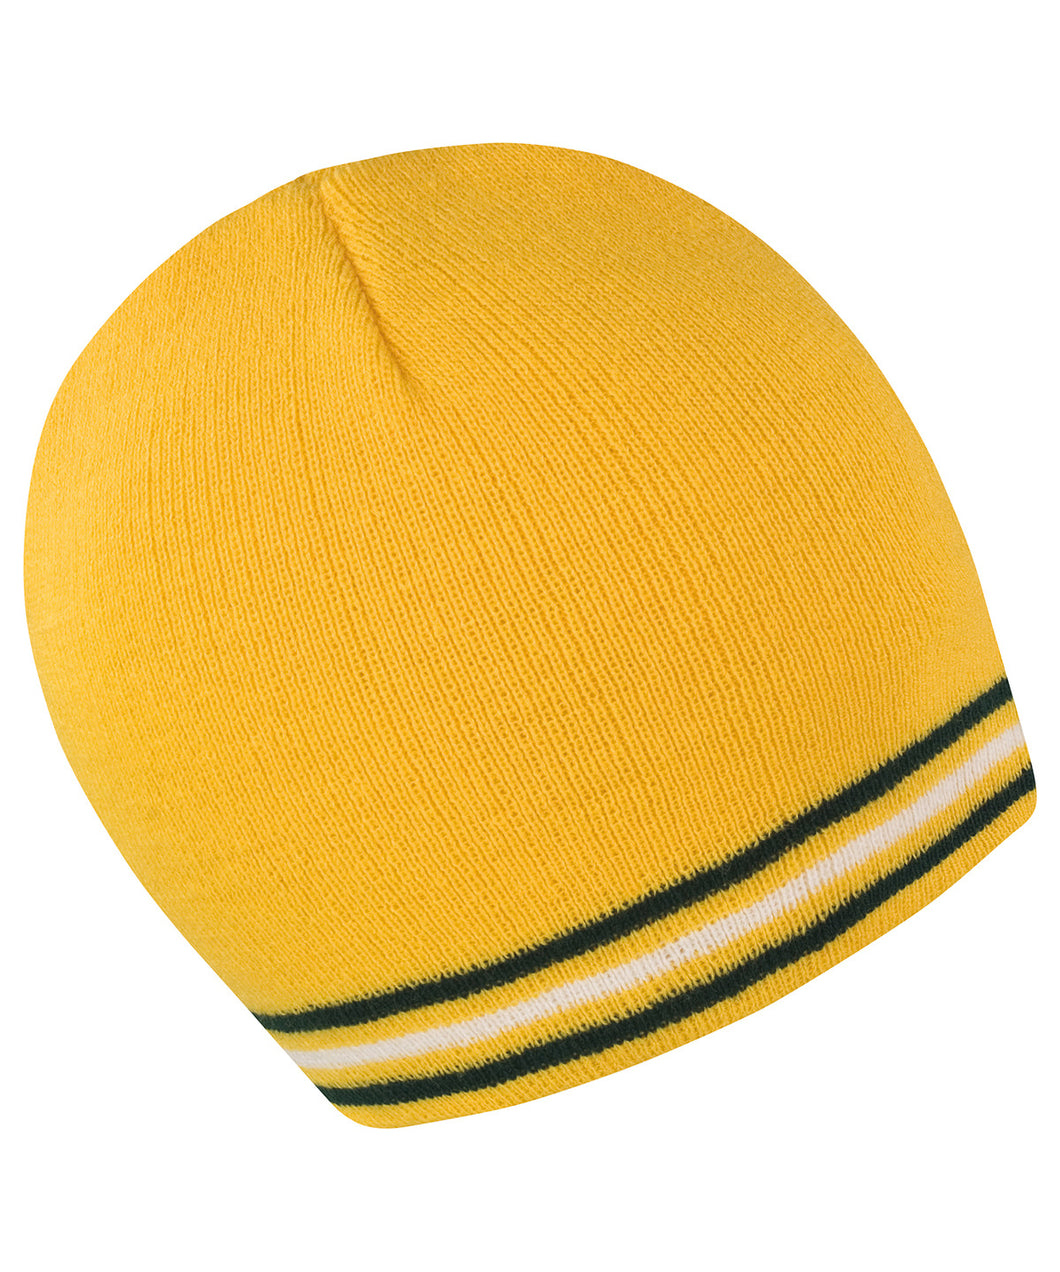 Gold Green and White Contrast Beanie